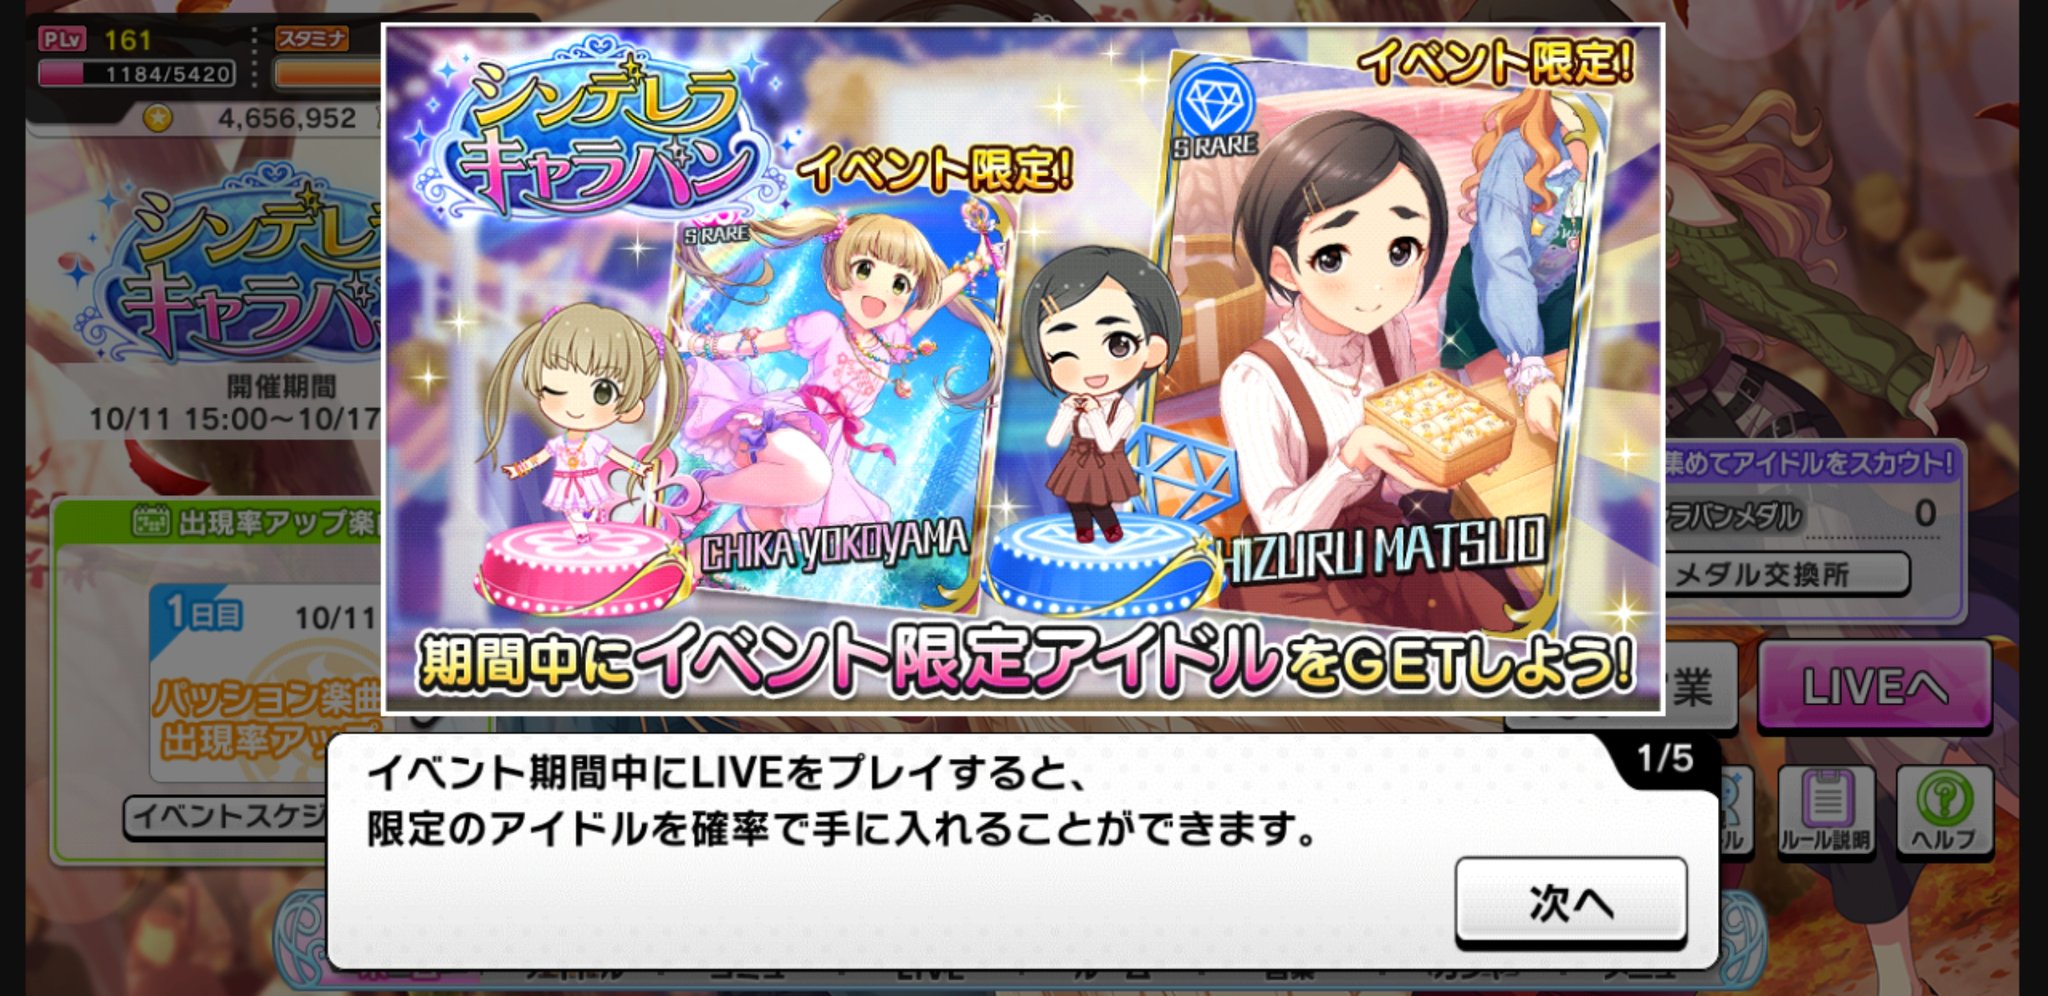 Deresute デレステ Eng The Cinderella Caravan Event Has Begun Chizuru And Chika Are The Event Idols This Time The Event Ends On October 17 At 9 Pm Jst Good Luck To